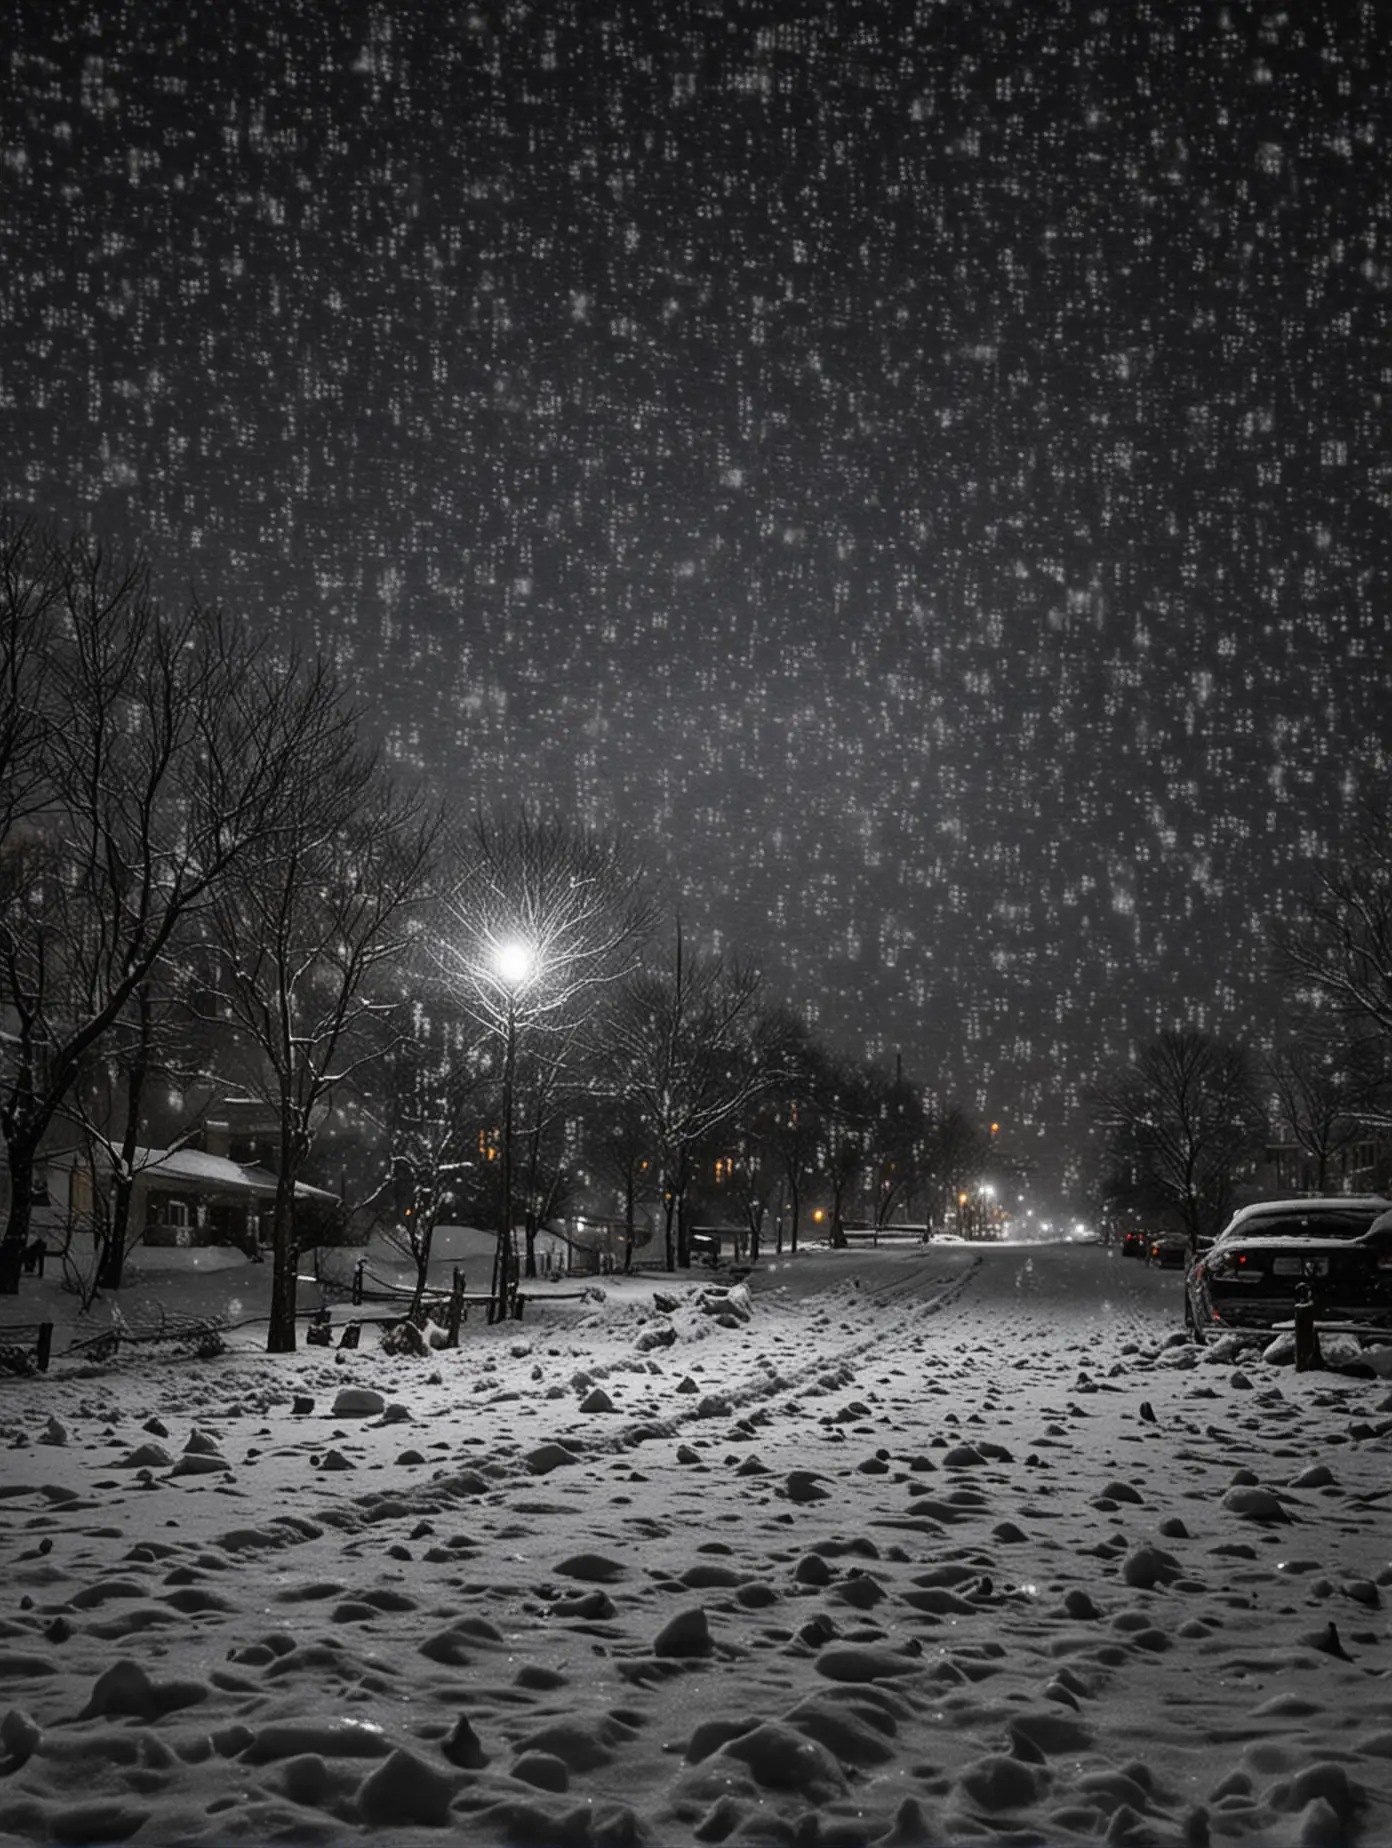 snow flurries at night time
